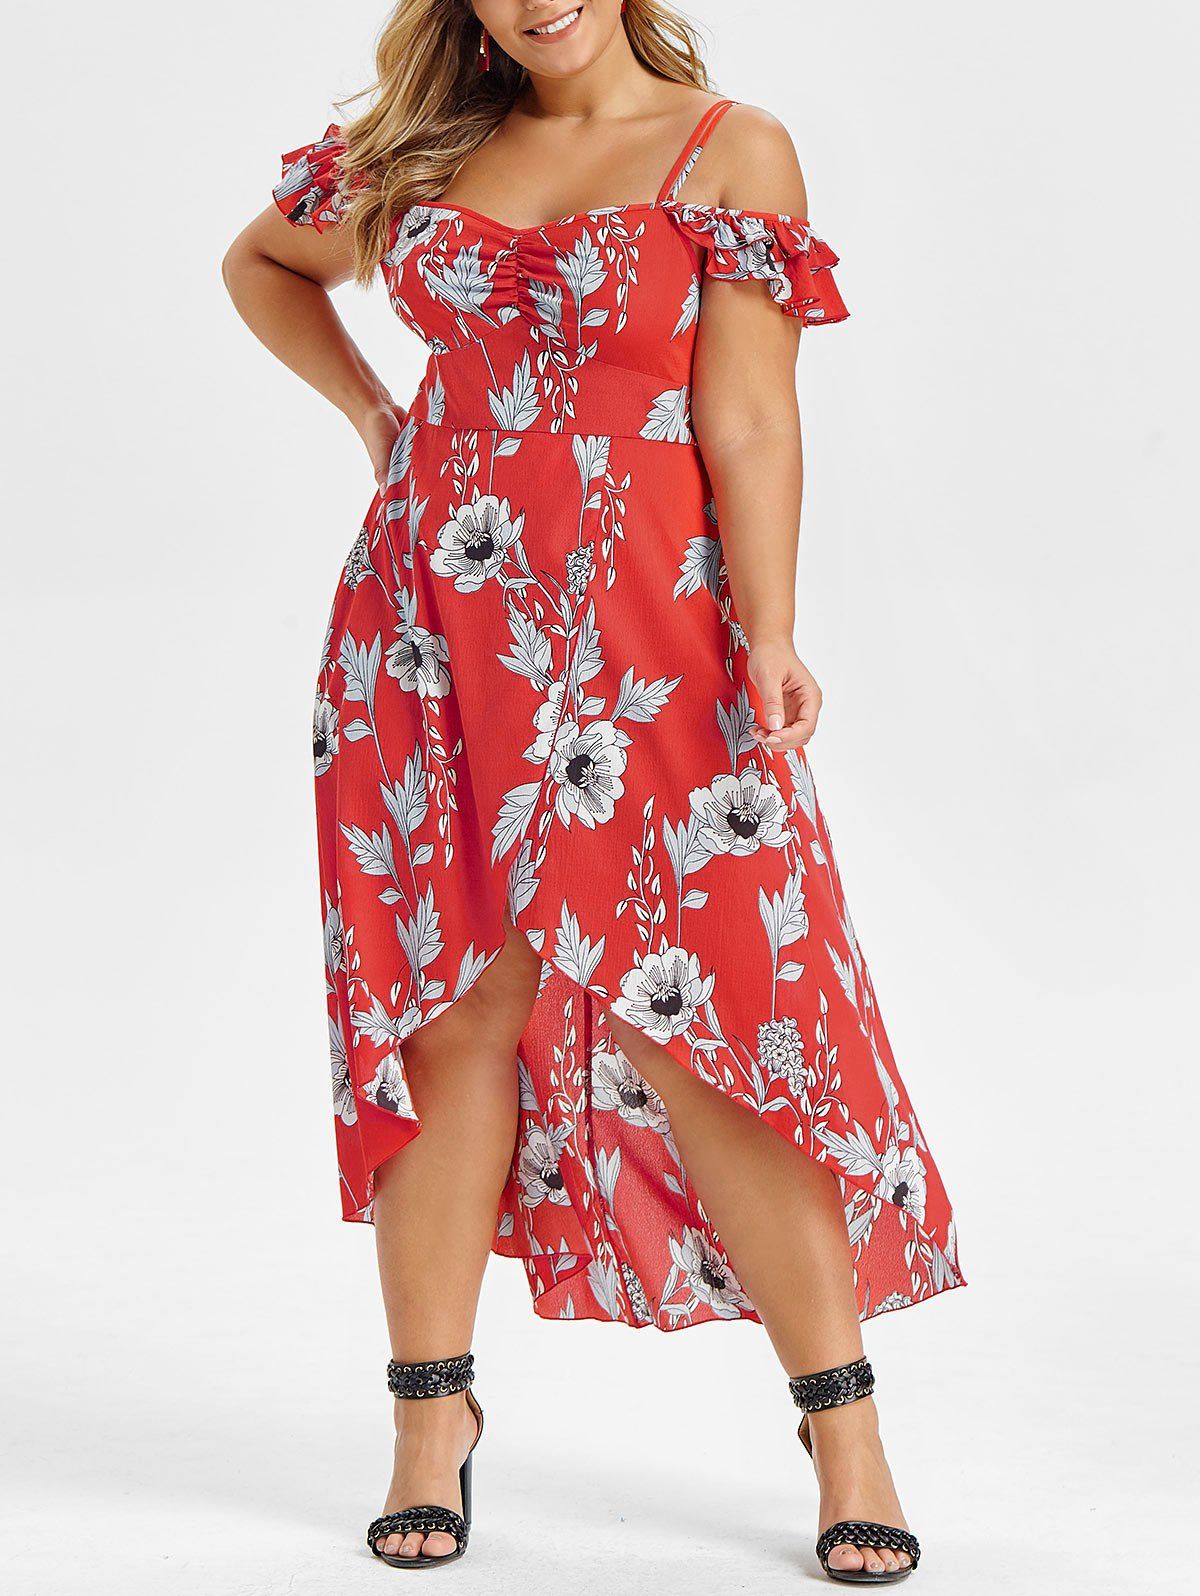 Plus Size Floral Overlay High Low Maxi Dress - RED L